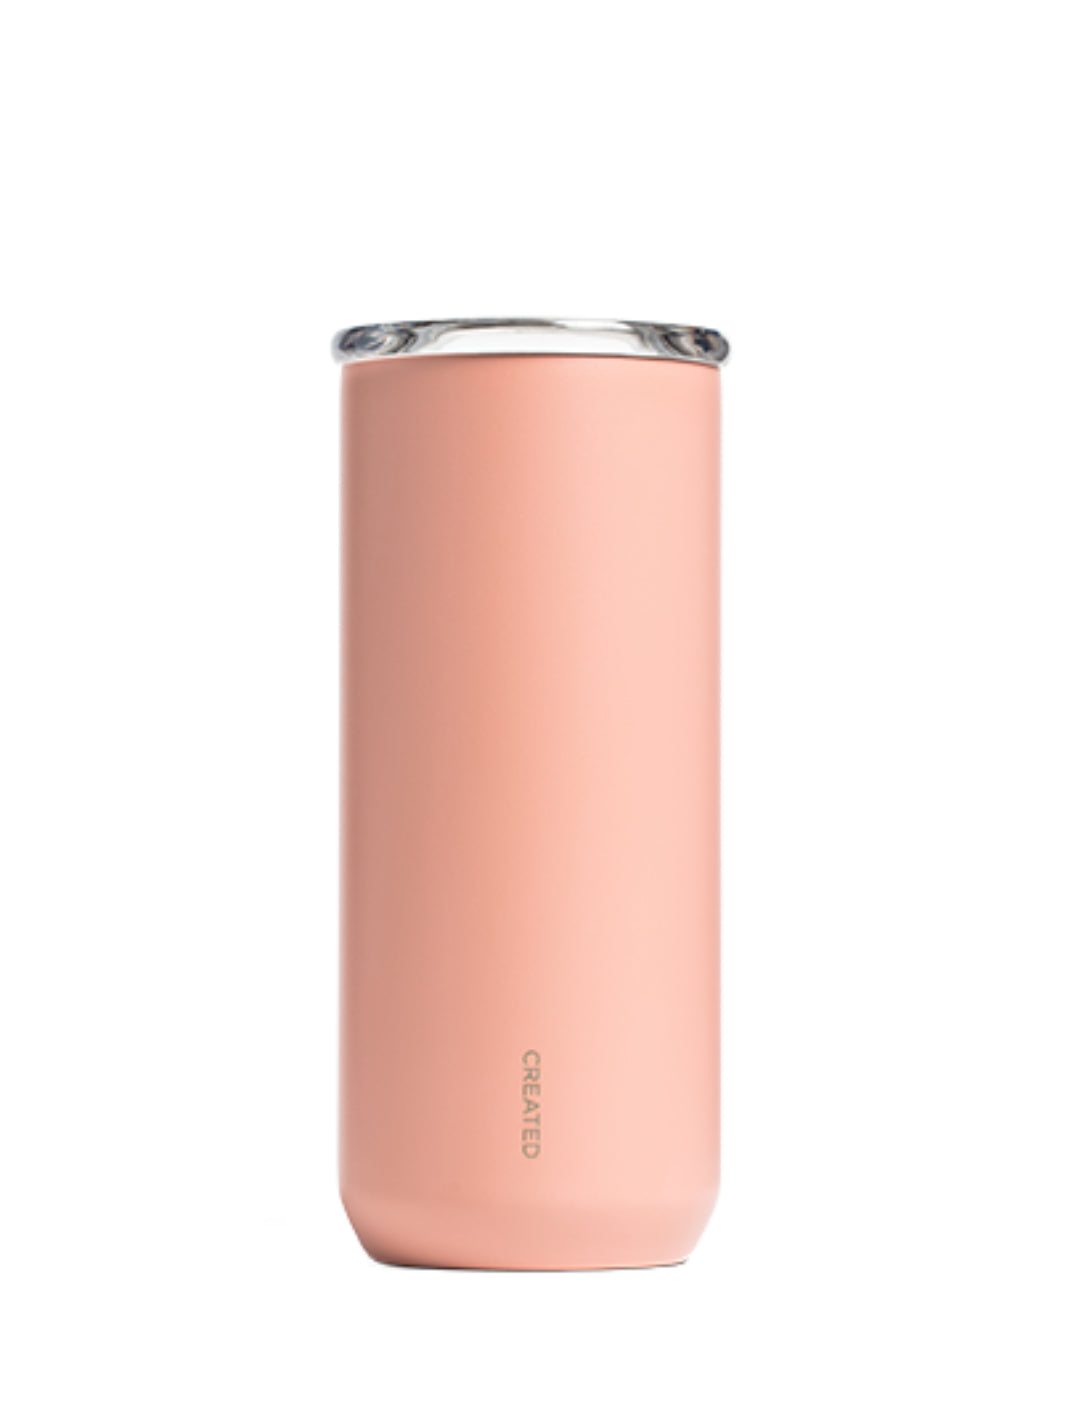 Stelton - To Go Click to go cup 6.8 oz